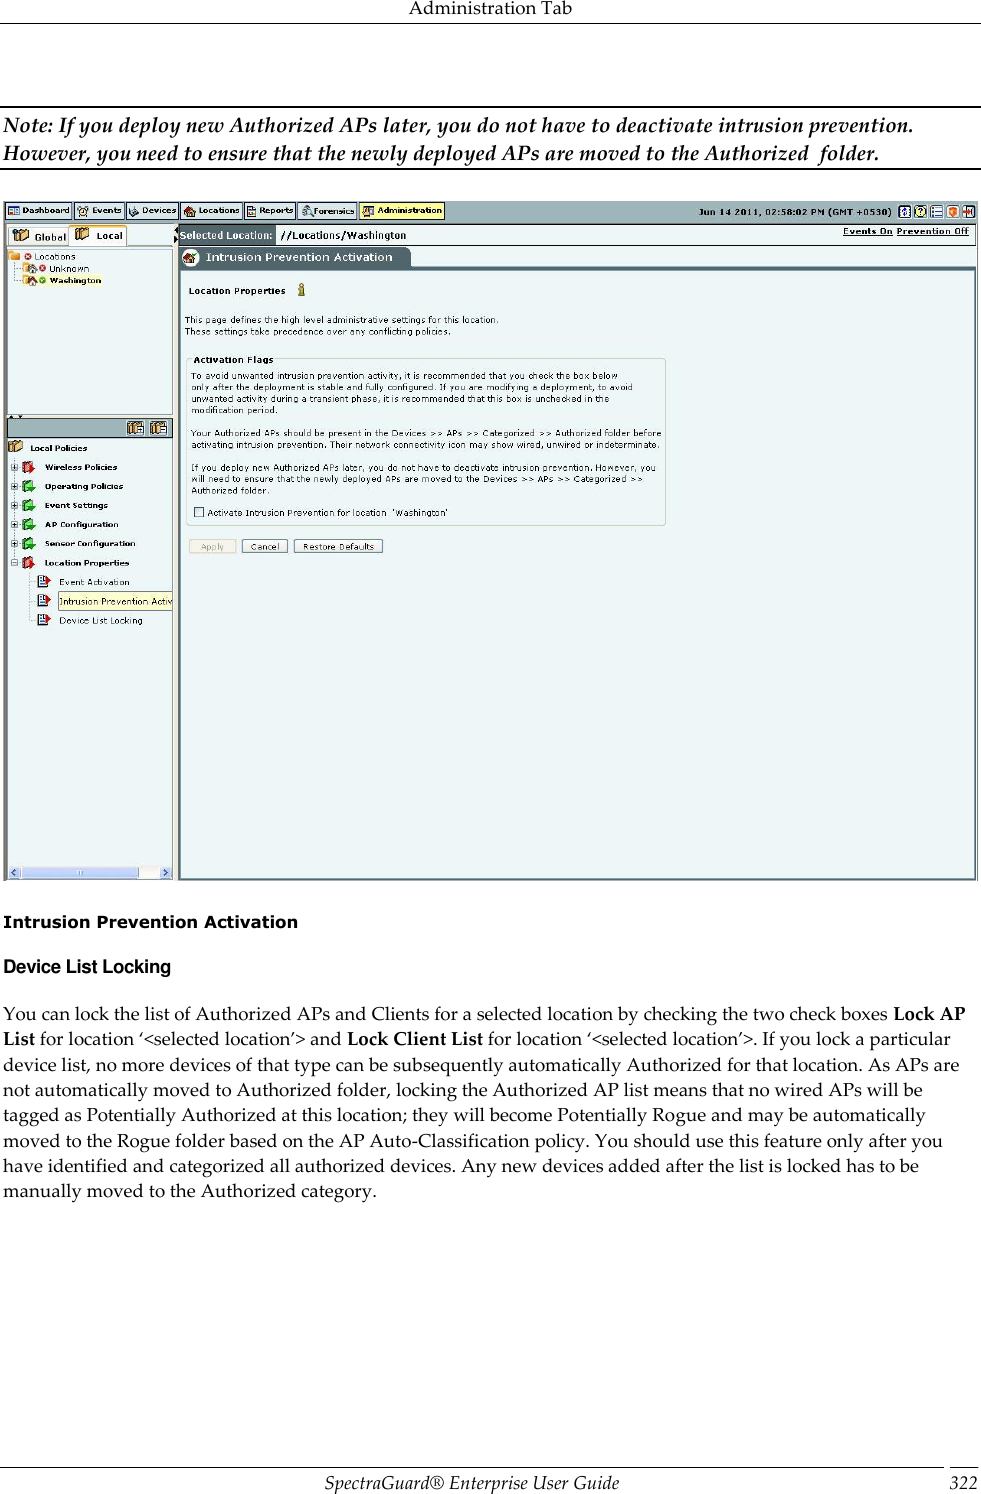 Administration Tab SpectraGuard®  Enterprise User Guide 322   Note: If you deploy new Authorized APs later, you do not have to deactivate intrusion prevention. However, you need to ensure that the newly deployed APs are moved to the Authorized  folder.      Intrusion Prevention Activation Device List Locking You can lock the list of Authorized APs and Clients for a selected location by checking the two check boxes Lock AP List for location ‘&lt;selected location’&gt; and Lock Client List for location ‘&lt;selected location’&gt;. If you lock a particular device list, no more devices of that type can be subsequently automatically Authorized for that location. As APs are not automatically moved to Authorized folder, locking the Authorized AP list means that no wired APs will be tagged as Potentially Authorized at this location; they will become Potentially Rogue and may be automatically moved to the Rogue folder based on the AP Auto-Classification policy. You should use this feature only after you have identified and categorized all authorized devices. Any new devices added after the list is locked has to be manually moved to the Authorized category.   